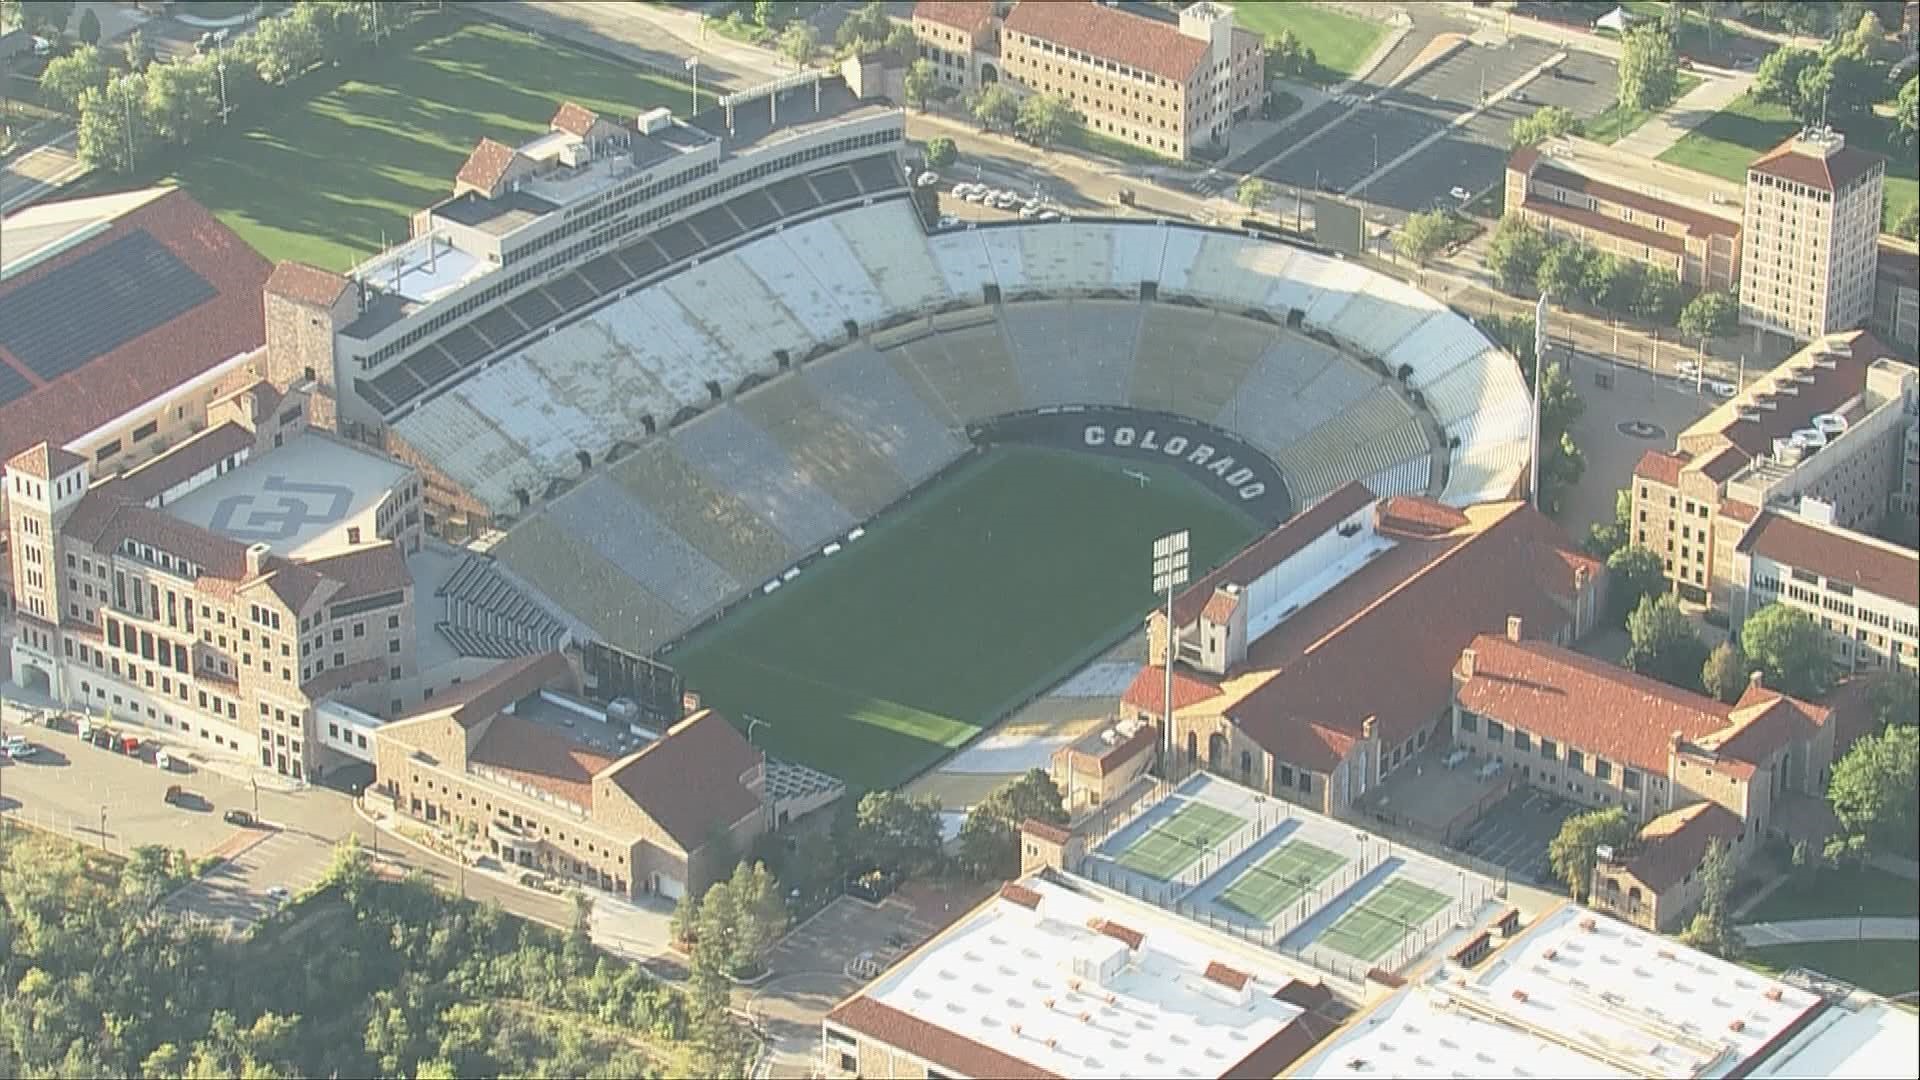 Folsom Field will celebrate its 100th season in 2023 as the Deion “Coach Prime” Sanders Era begins for the Colorado Buffaloes.